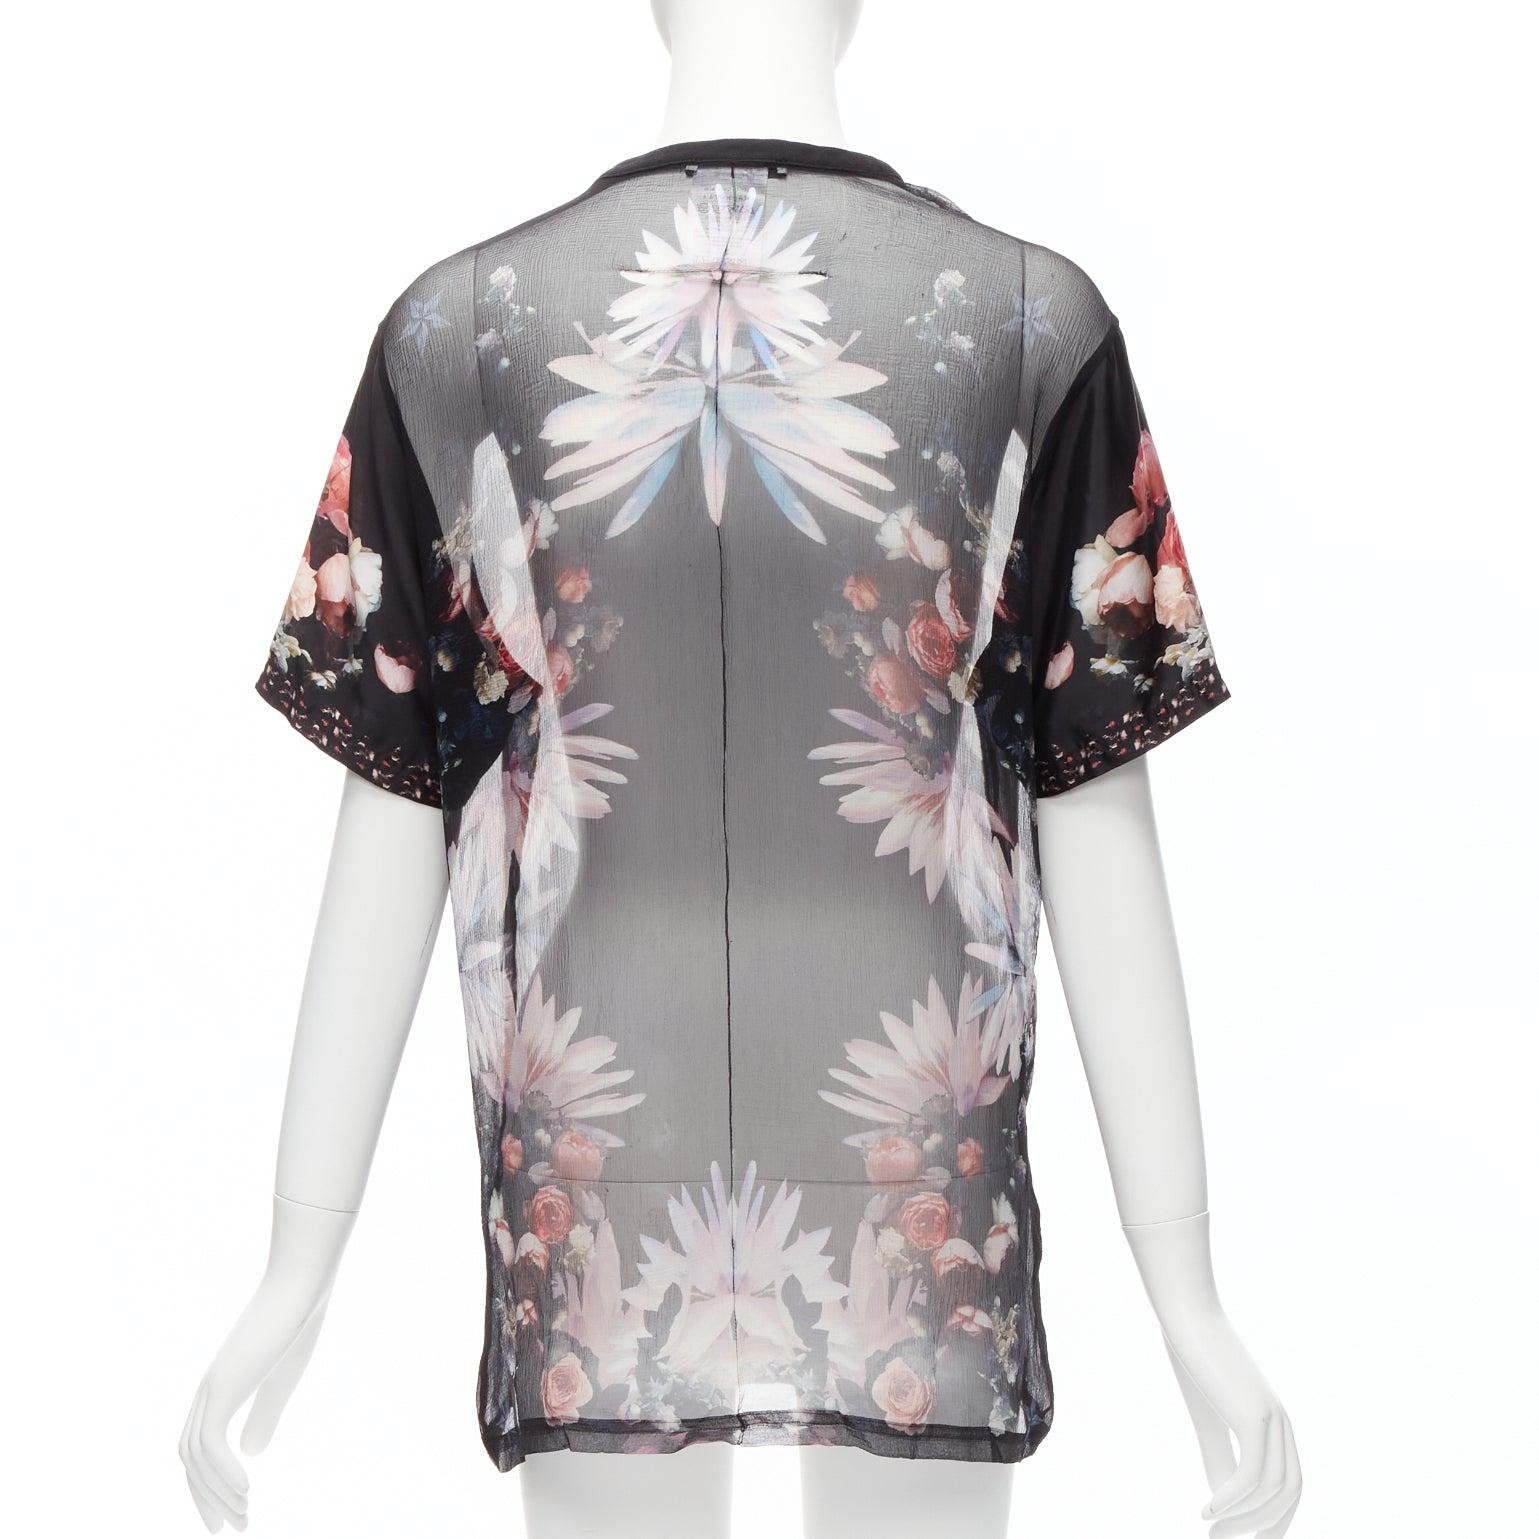 GIVENCHY RICCARDO TISCI red black floral sheer romantic goth tshirt FR34 XS In Good Condition For Sale In Hong Kong, NT